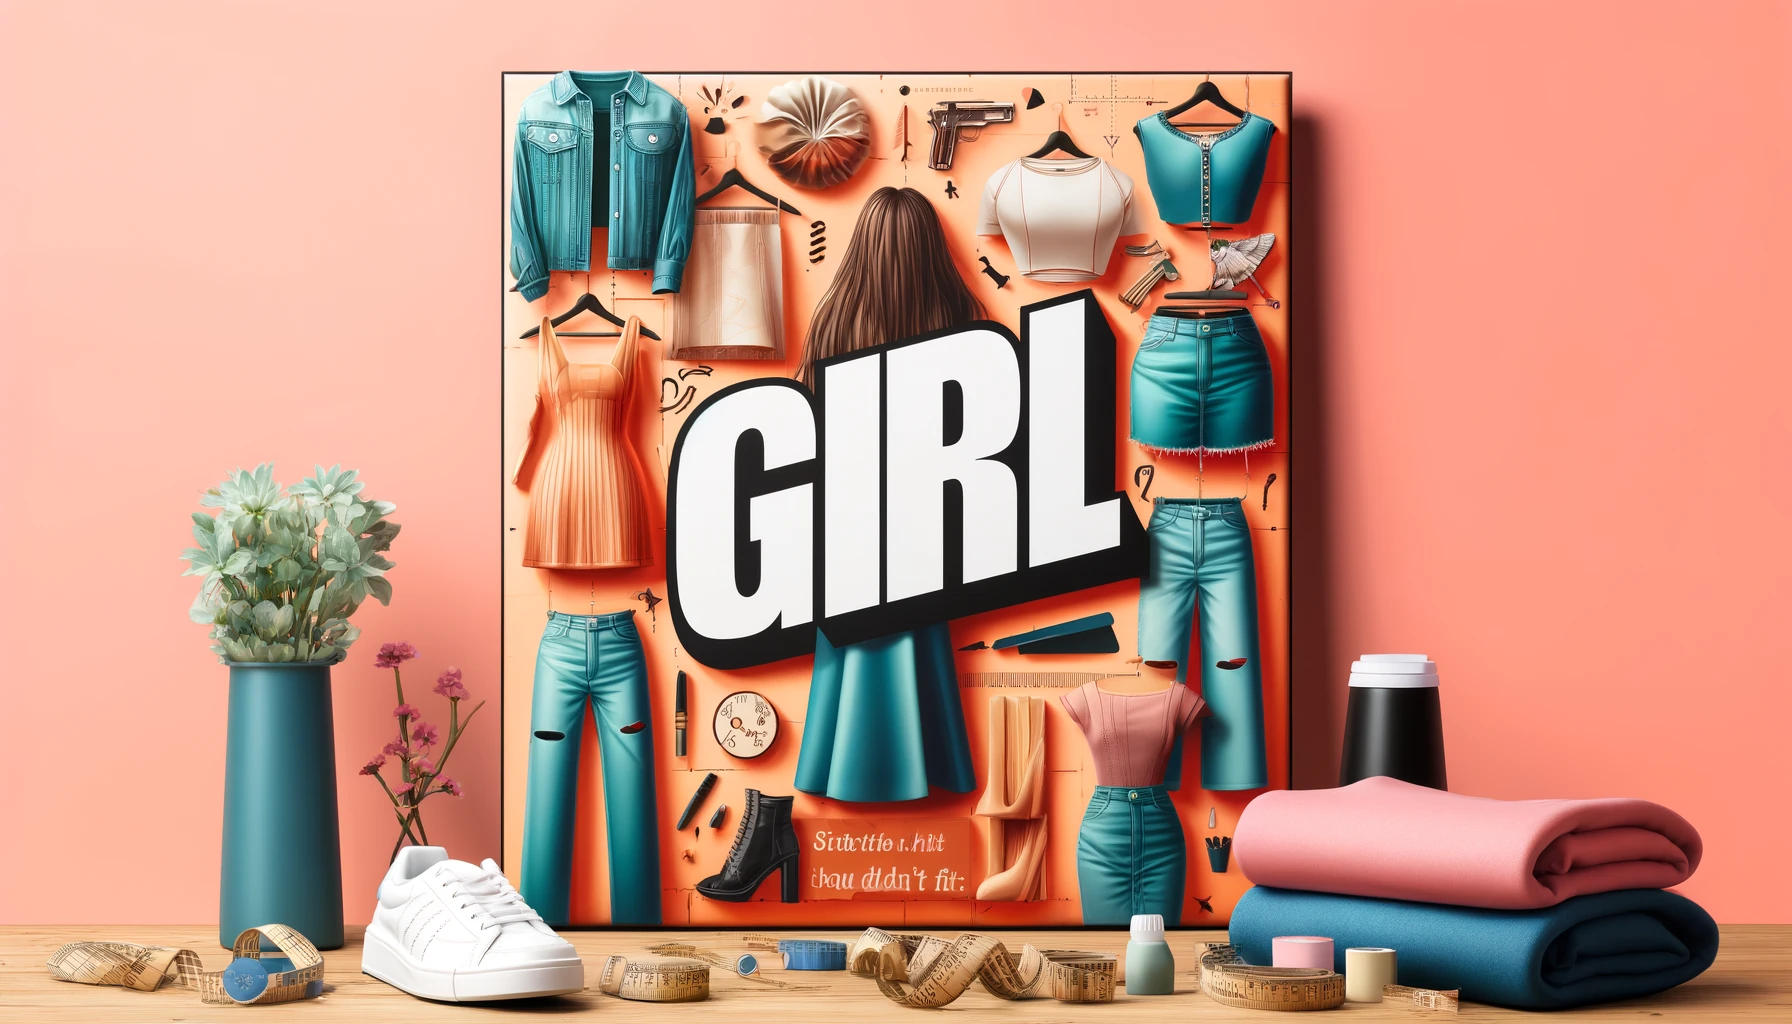 A stylish layout for a women's budget fashion brand named 'GRL' with a focus on situations where the size didn't fit. The image features trendy and affordable clothing items displayed attractively, with visual elements representing fitting issues. Incorporate the word 'GRL' prominently in the design. The background should be vibrant and fashionable, reflecting the brand's appeal to young women. The image should be in a 16:9 aspect ratio.